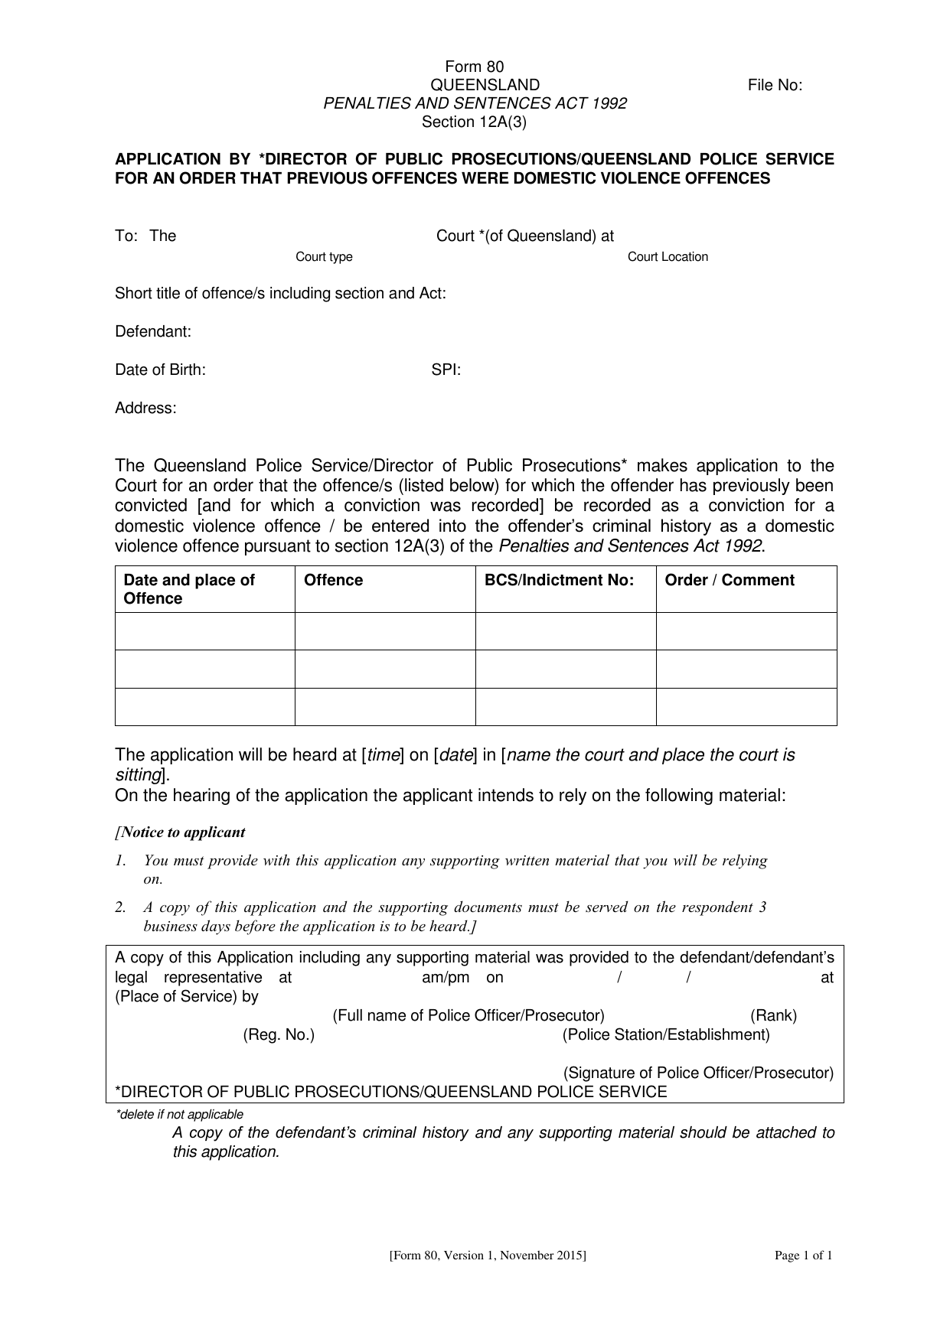 Form 80 Application by *director of Public Prosecutions / Queensland Police Service for an Order That Previous Offences Were Domestic Violence Offences - Queensland, Australia, Page 1